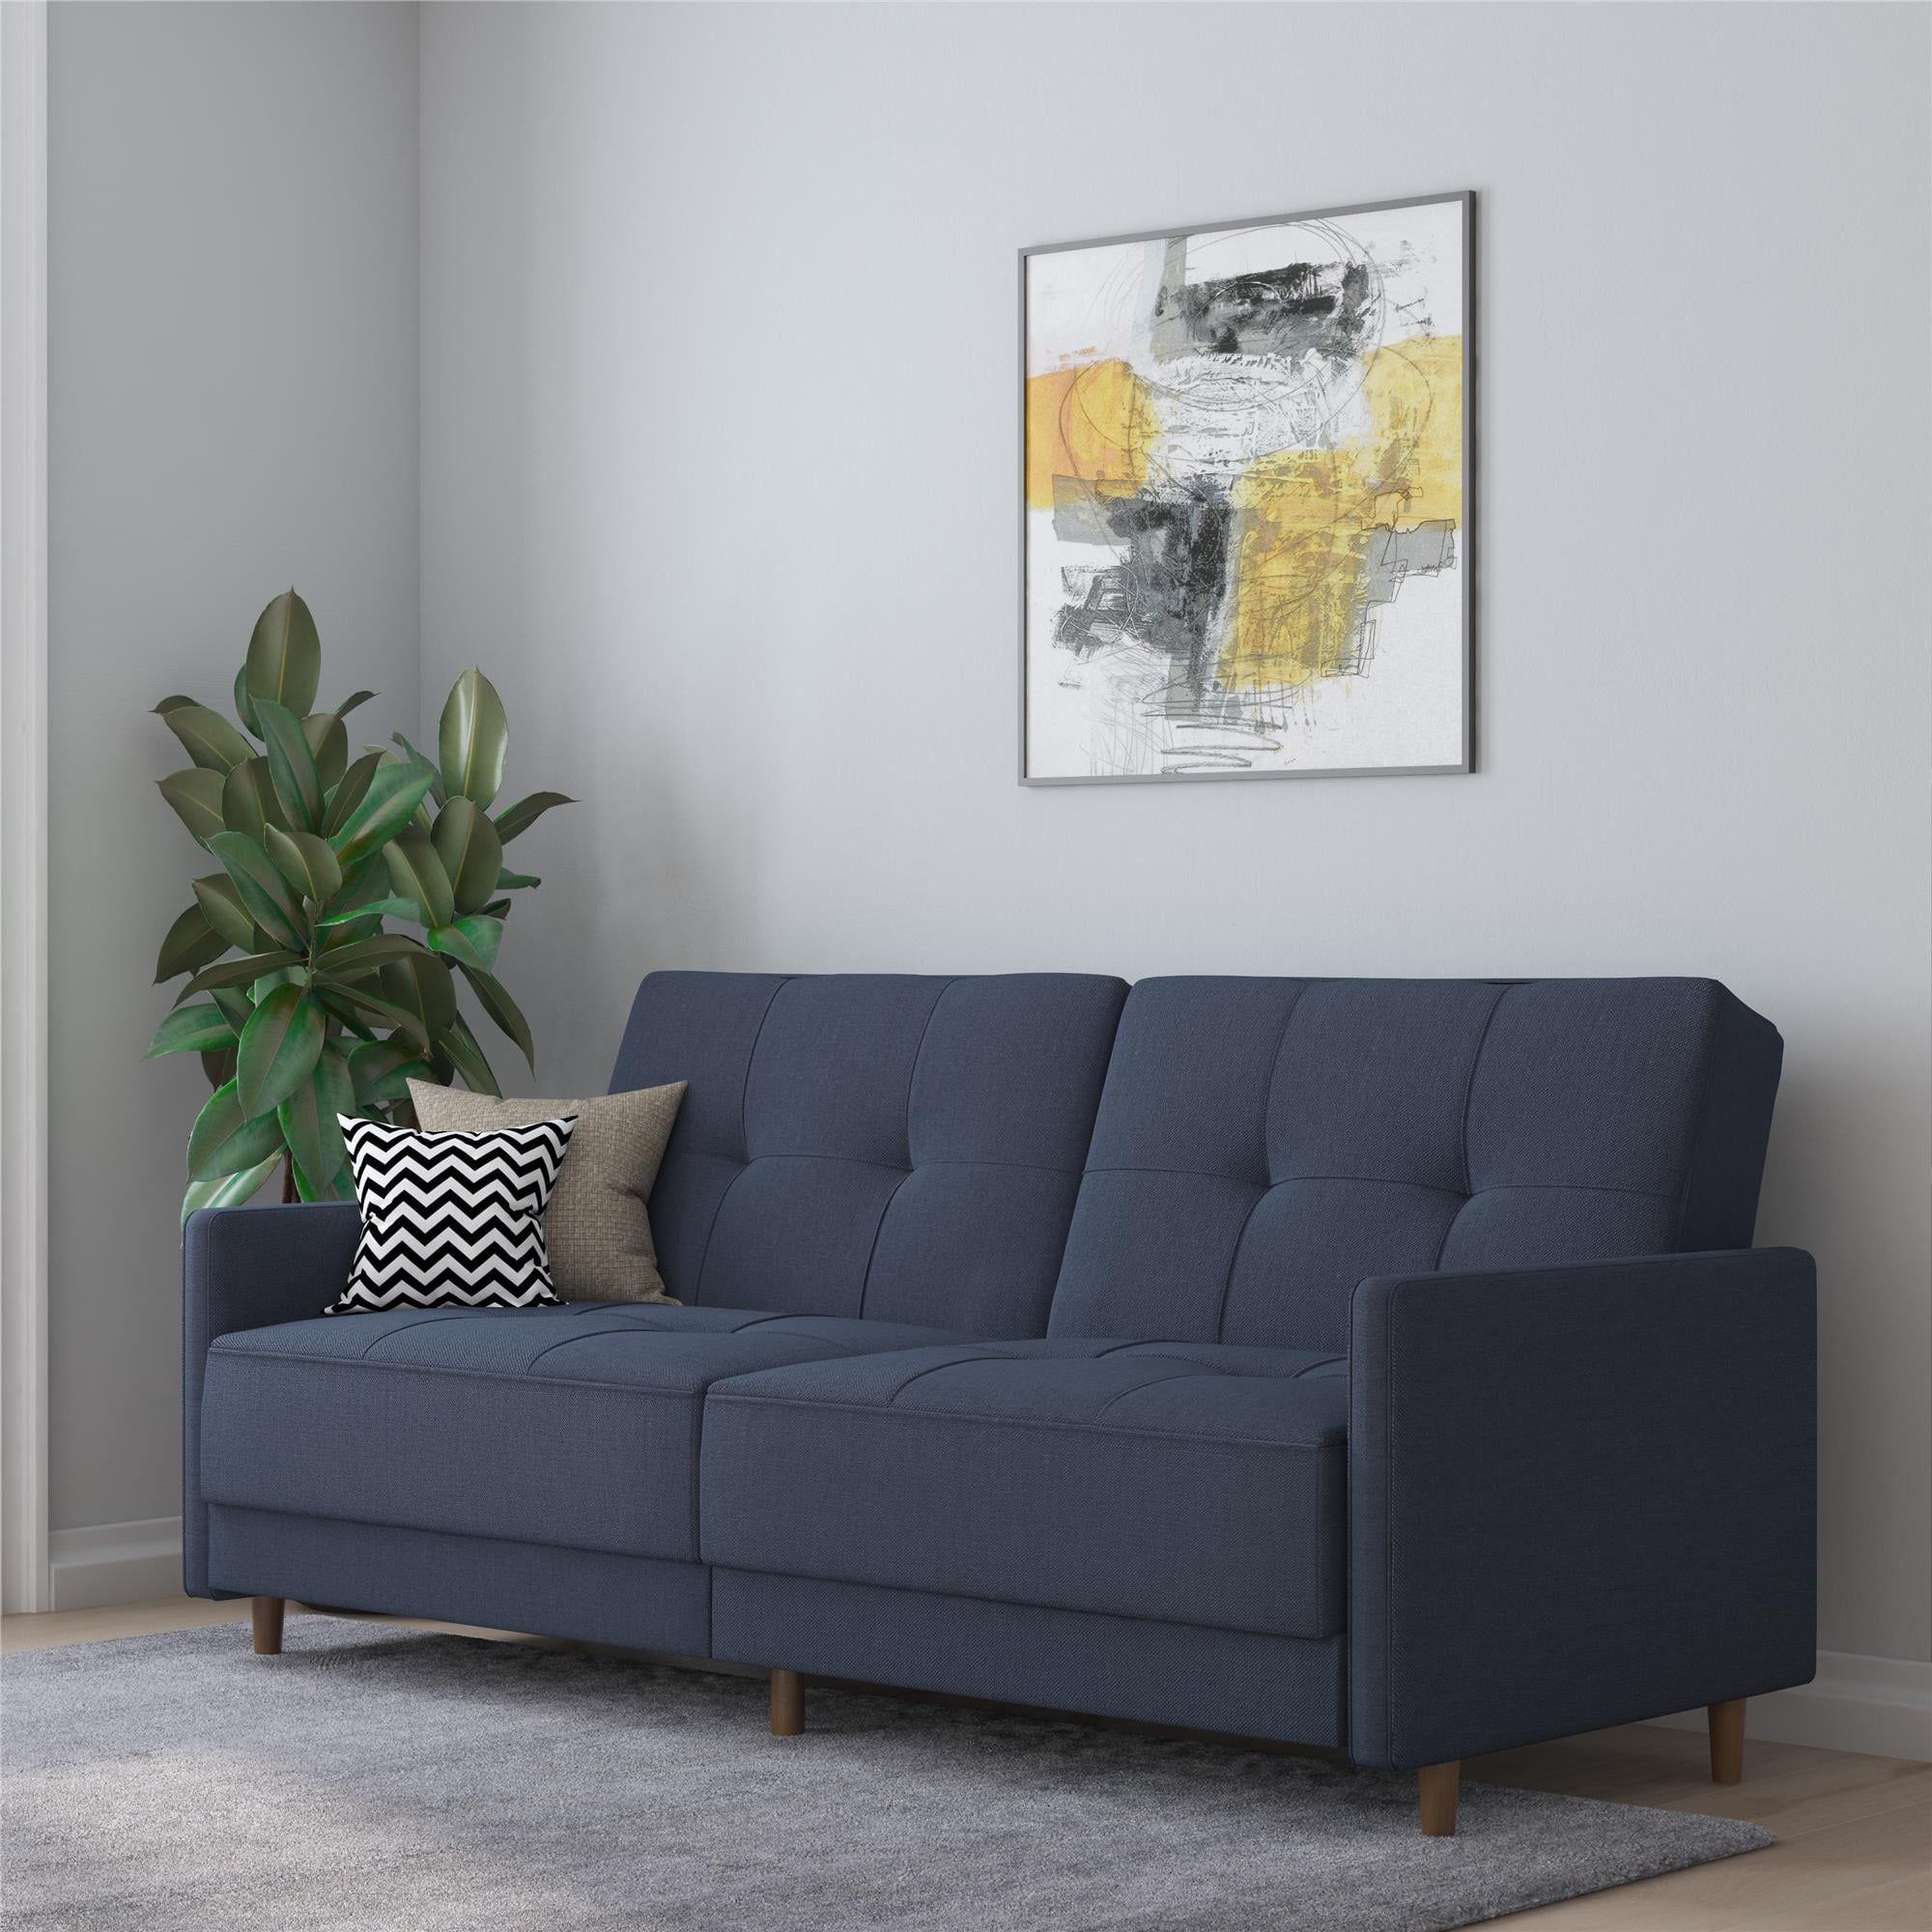 Buy Dhp Andora Coil Futon, Navy Blue Linen At Ubuy Cote Divoire With Navy Linen Coil Sofas (View 3 of 15)